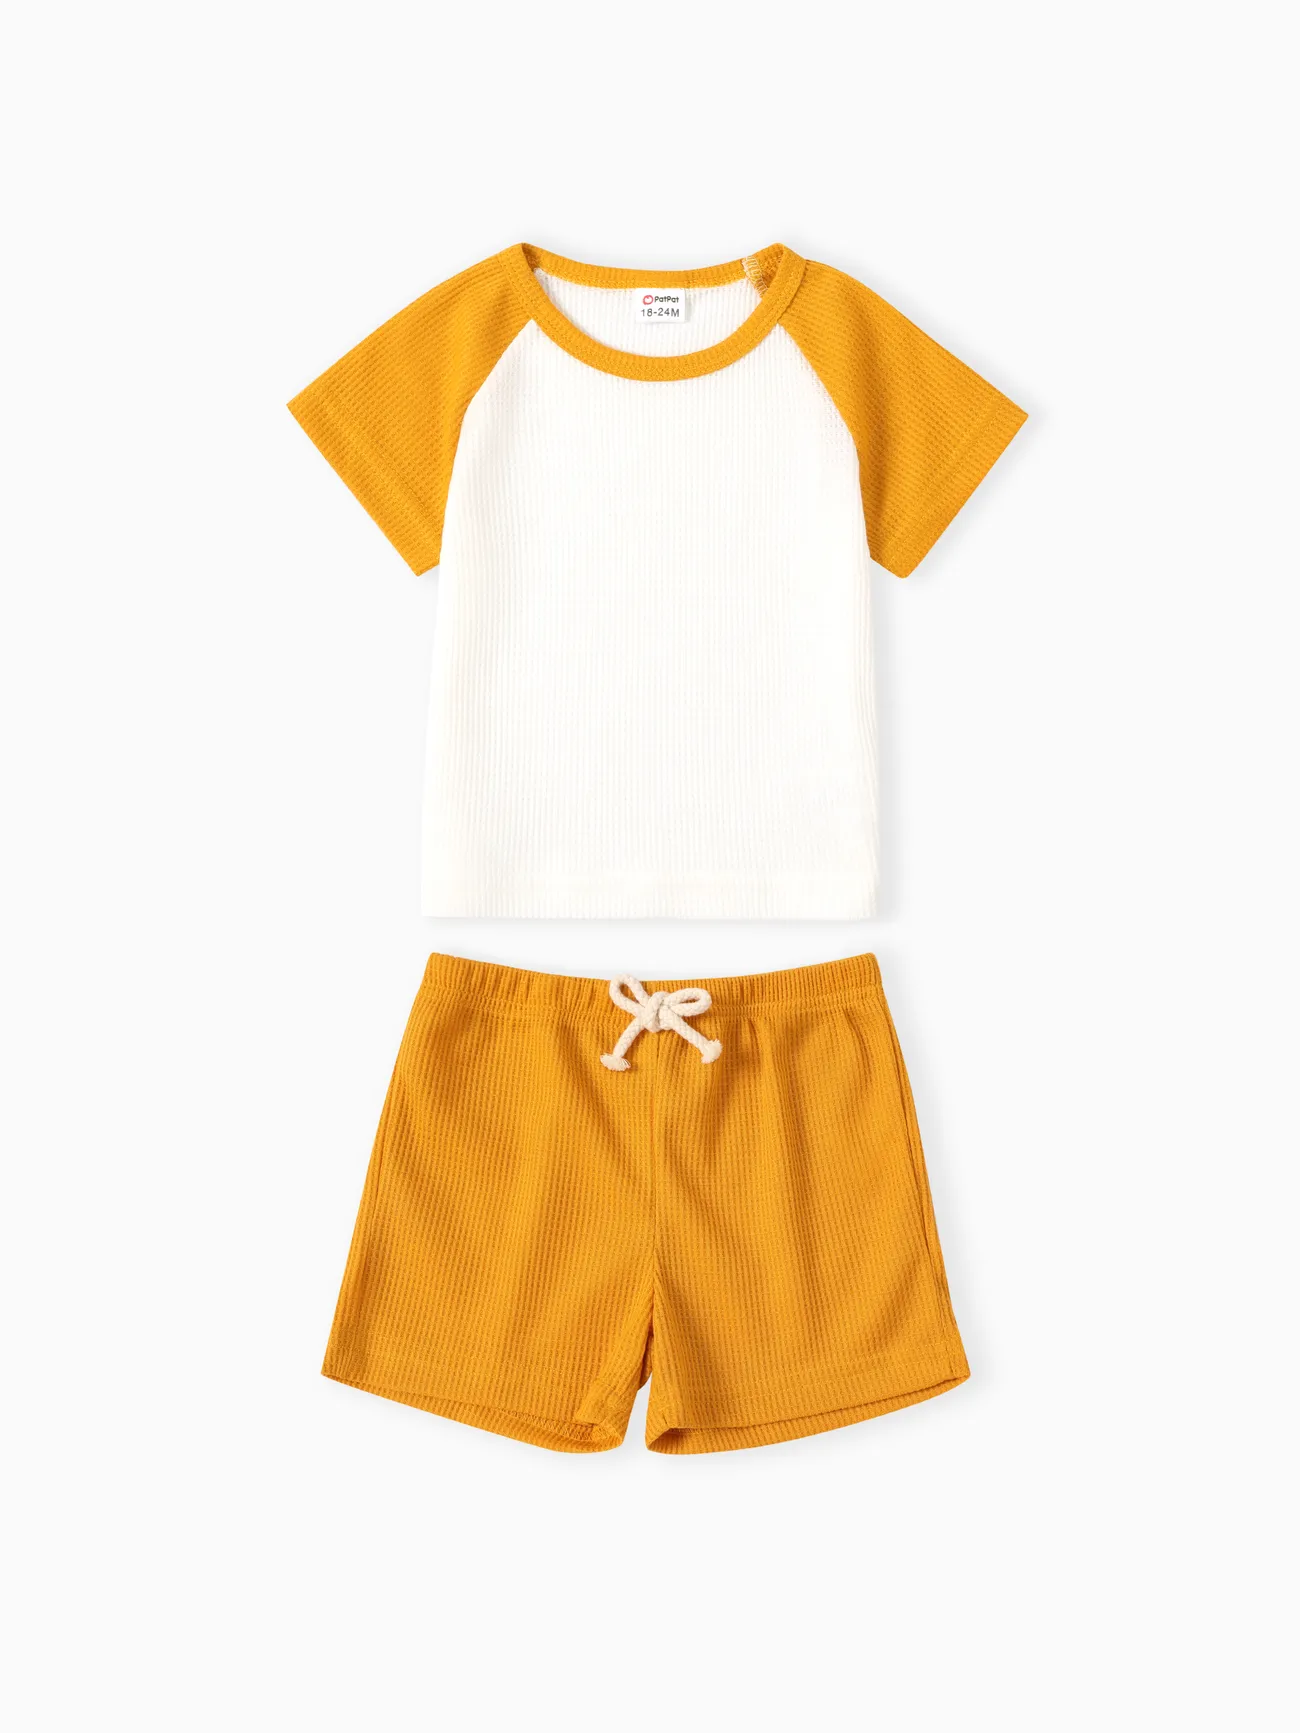 2-piece Toddler Boy Waffle Colorblock Raglan Sleeve Tee and Solid Color Shorts Set Yellow big image 1